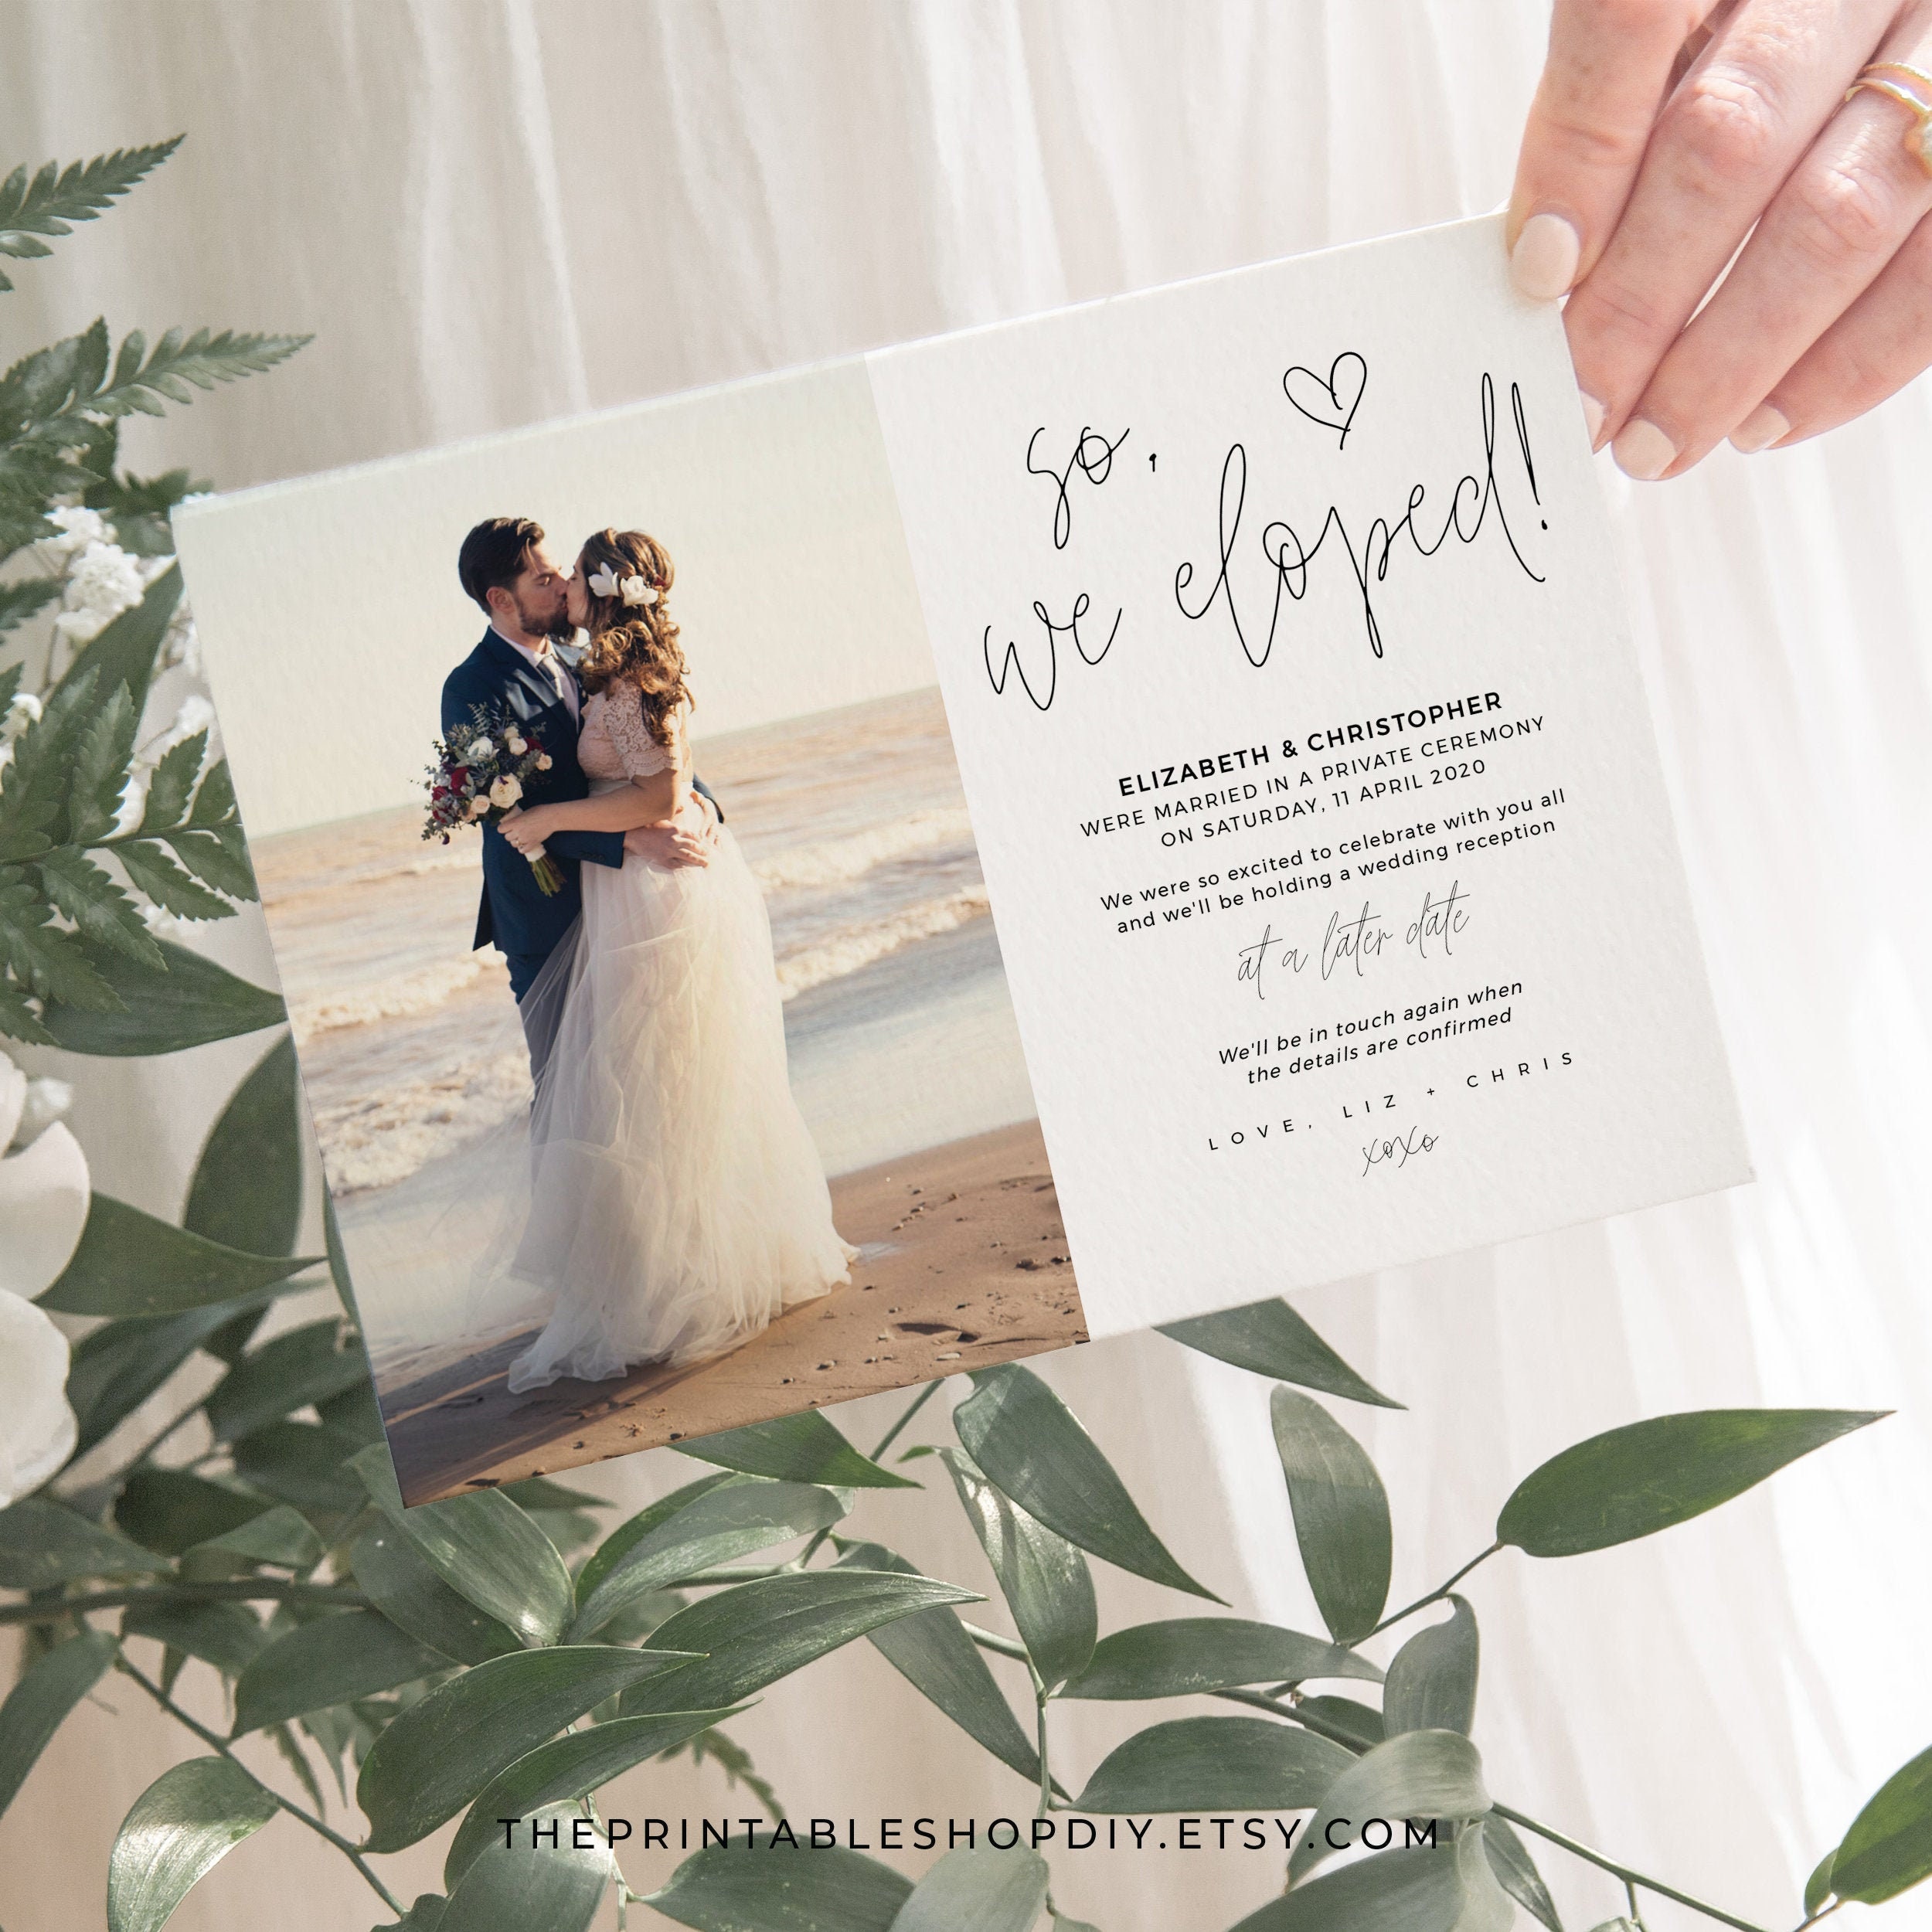 Elopement Announcement With Pictures We Eloped Template